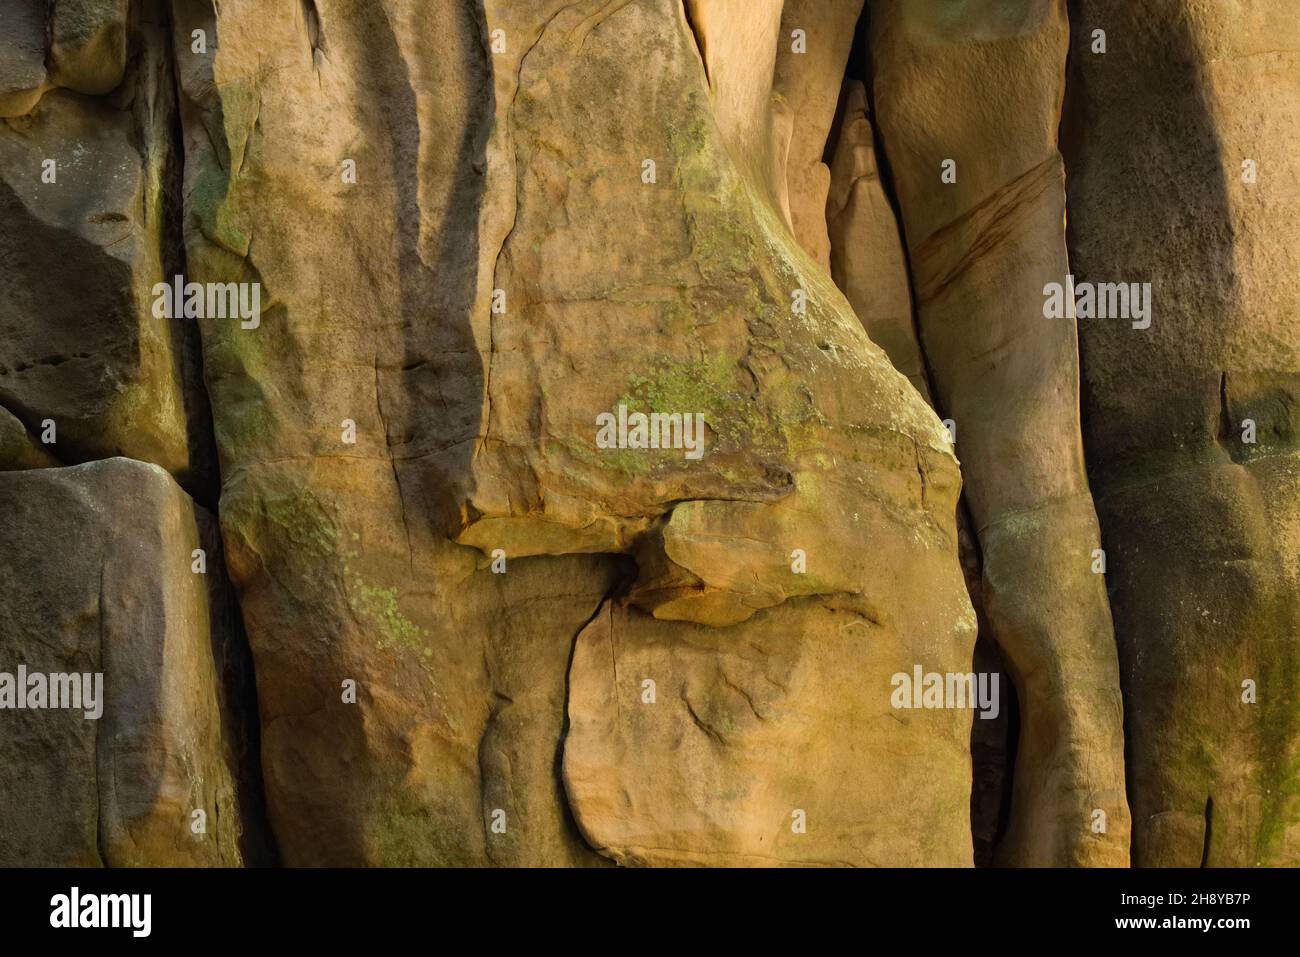 Natural walls of sandstone - rocks with deep crevices - abstract backgrounds Stock Photo